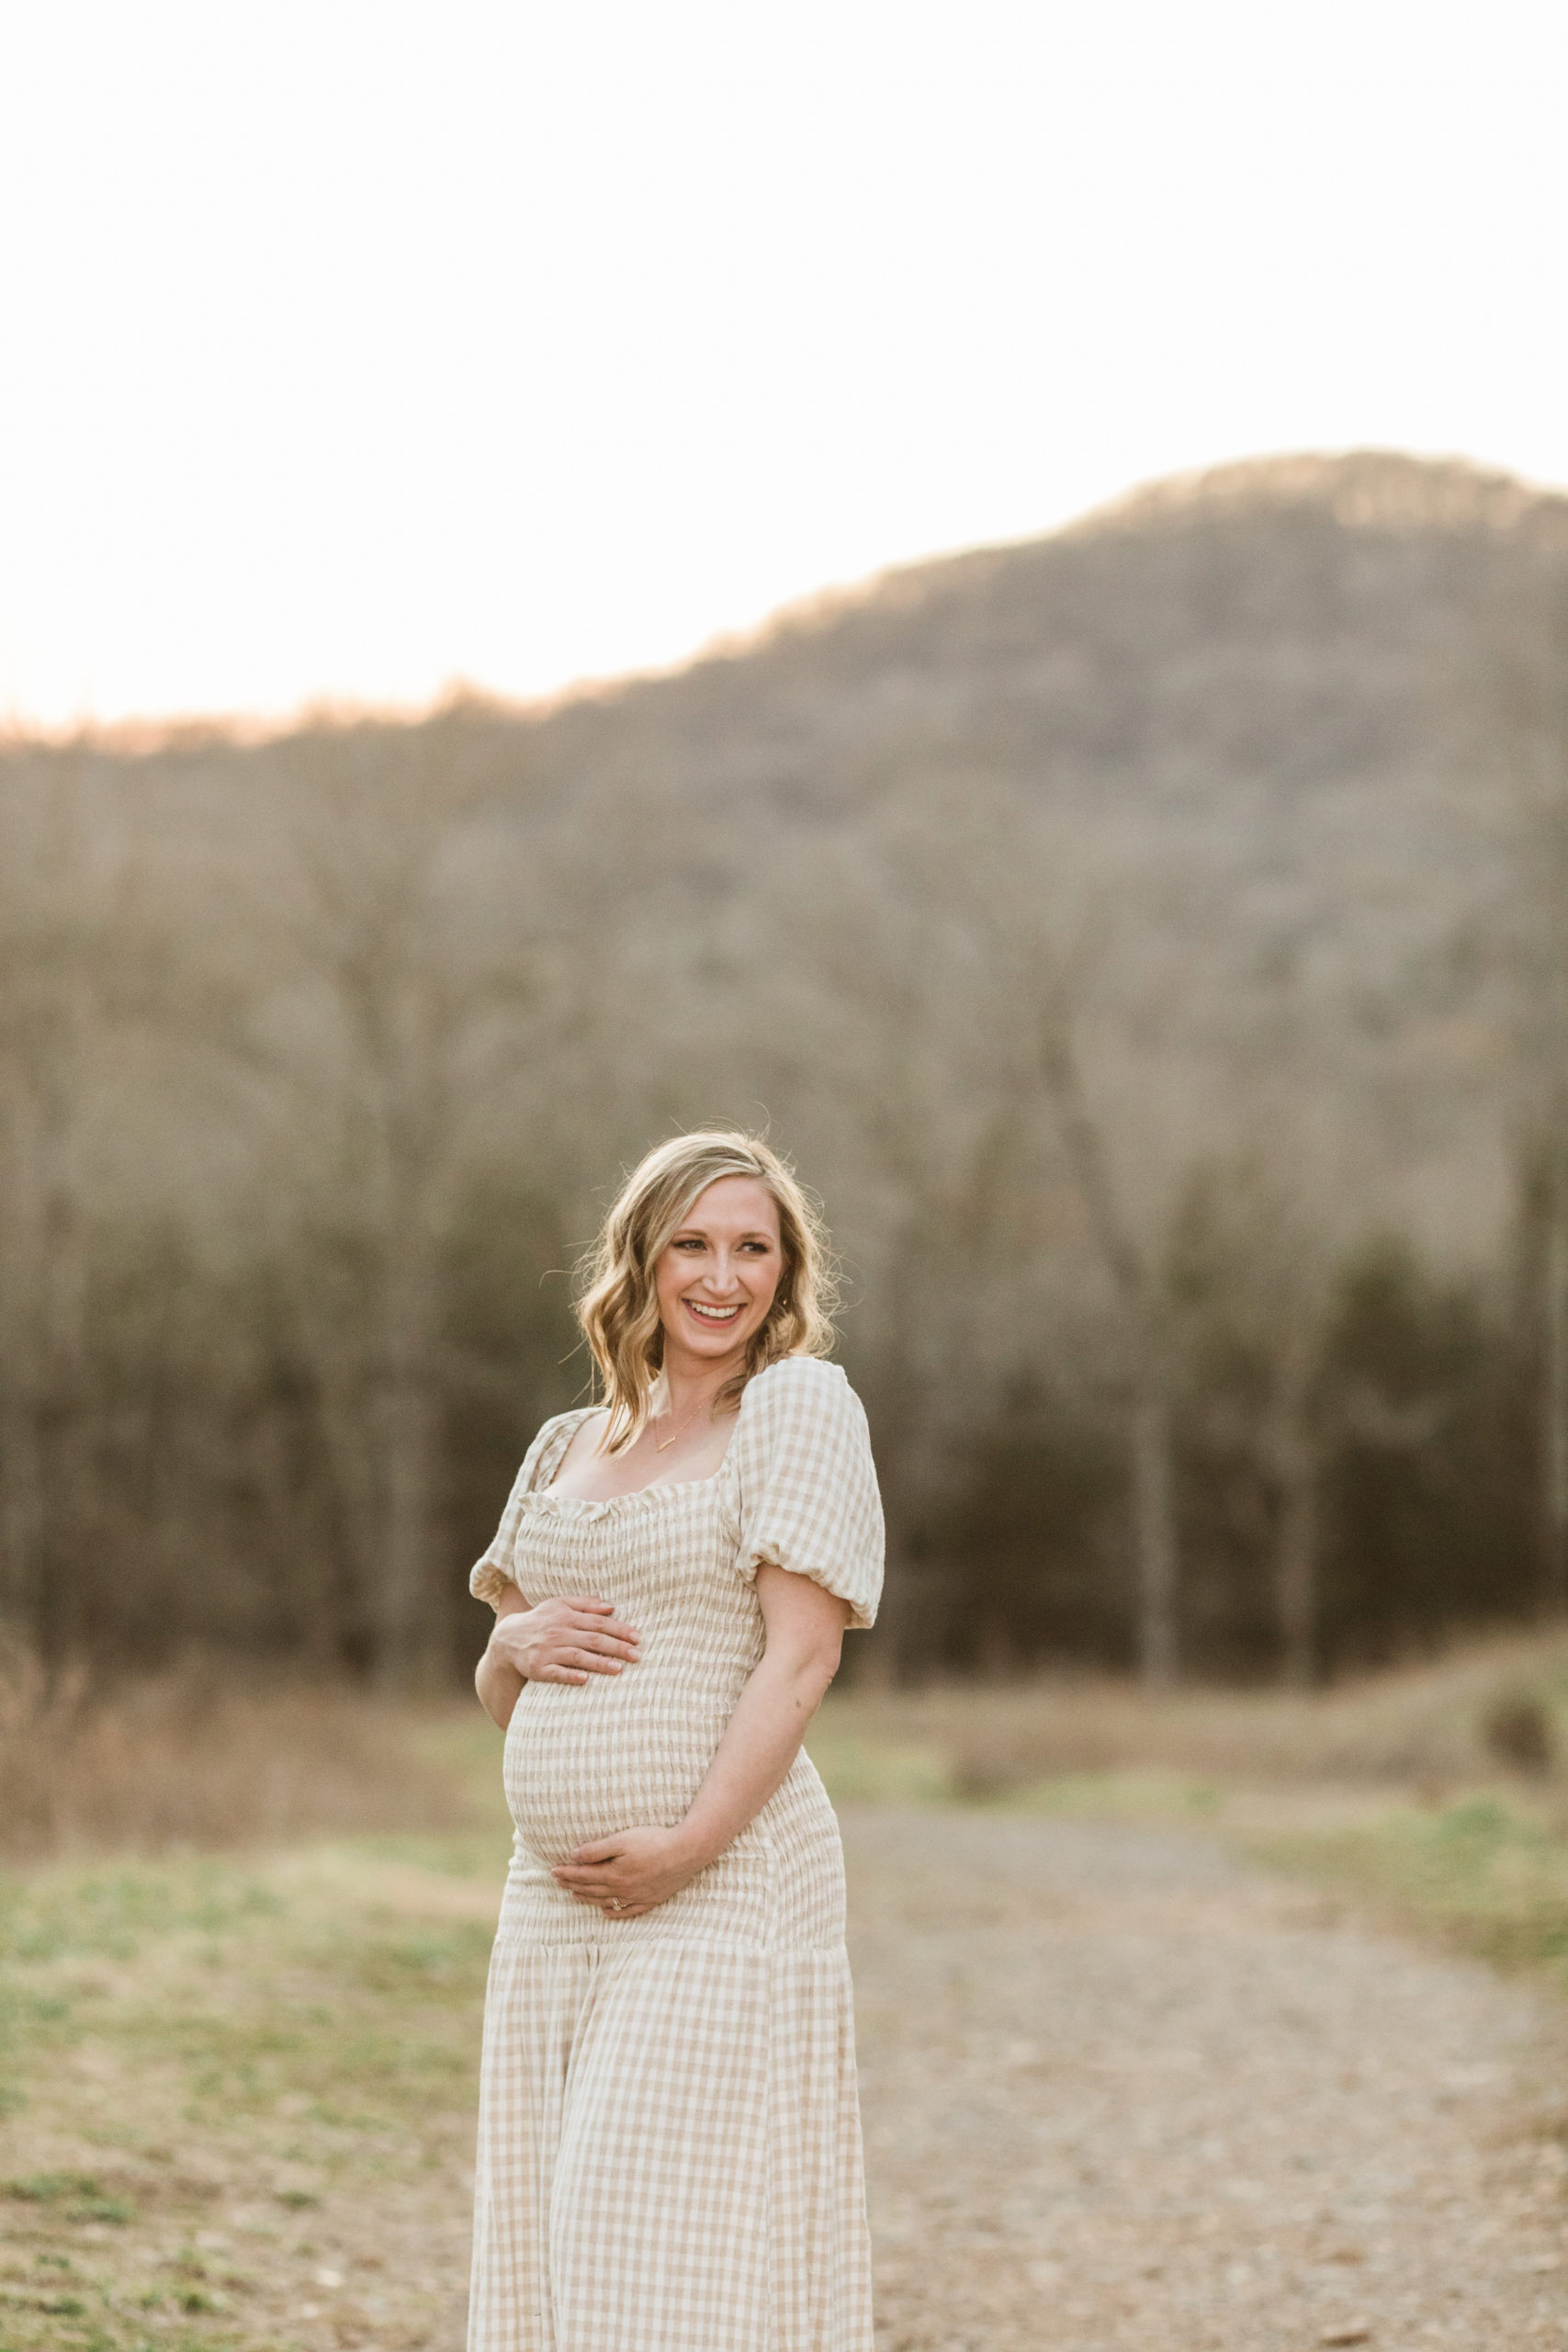 gigham cream and white midi dress showing off pregnant belly. outdoor maternity session.